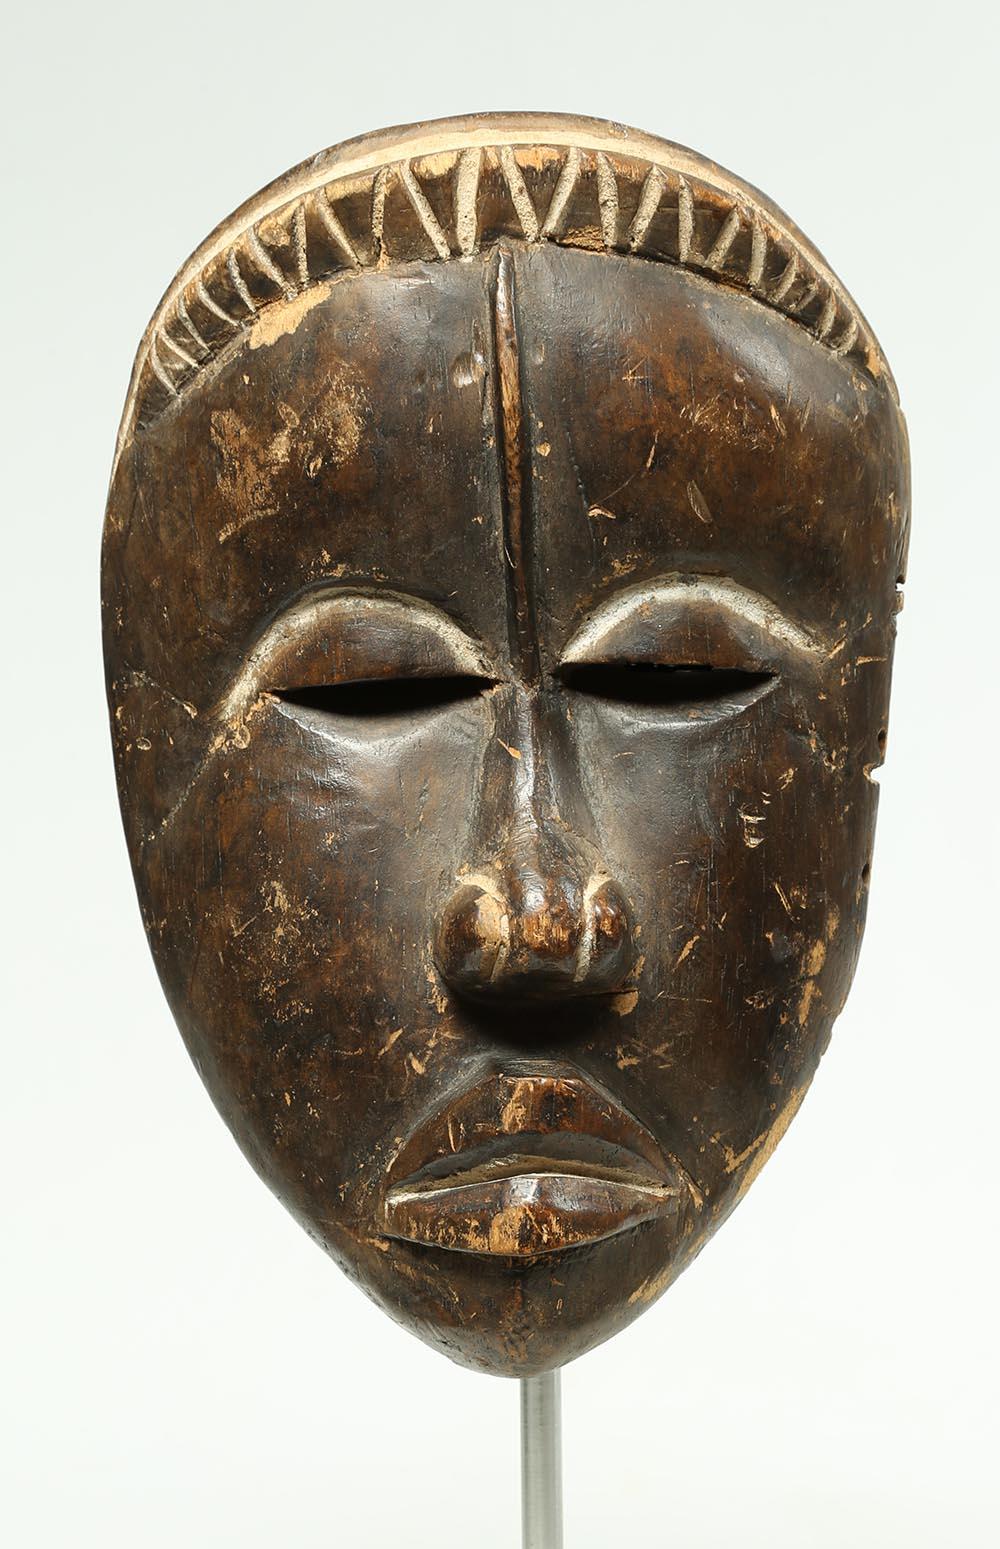 Carved wood tribal Dan mask

Old carved dry oxidized wood Dan mask with a touch of whimsey in its asymmetrical face. Some chips and areas of wear. Traces of white pigments, on custom aluminum base. Mid-20th century. Mask measures: 10 x 6 1/2 x 3